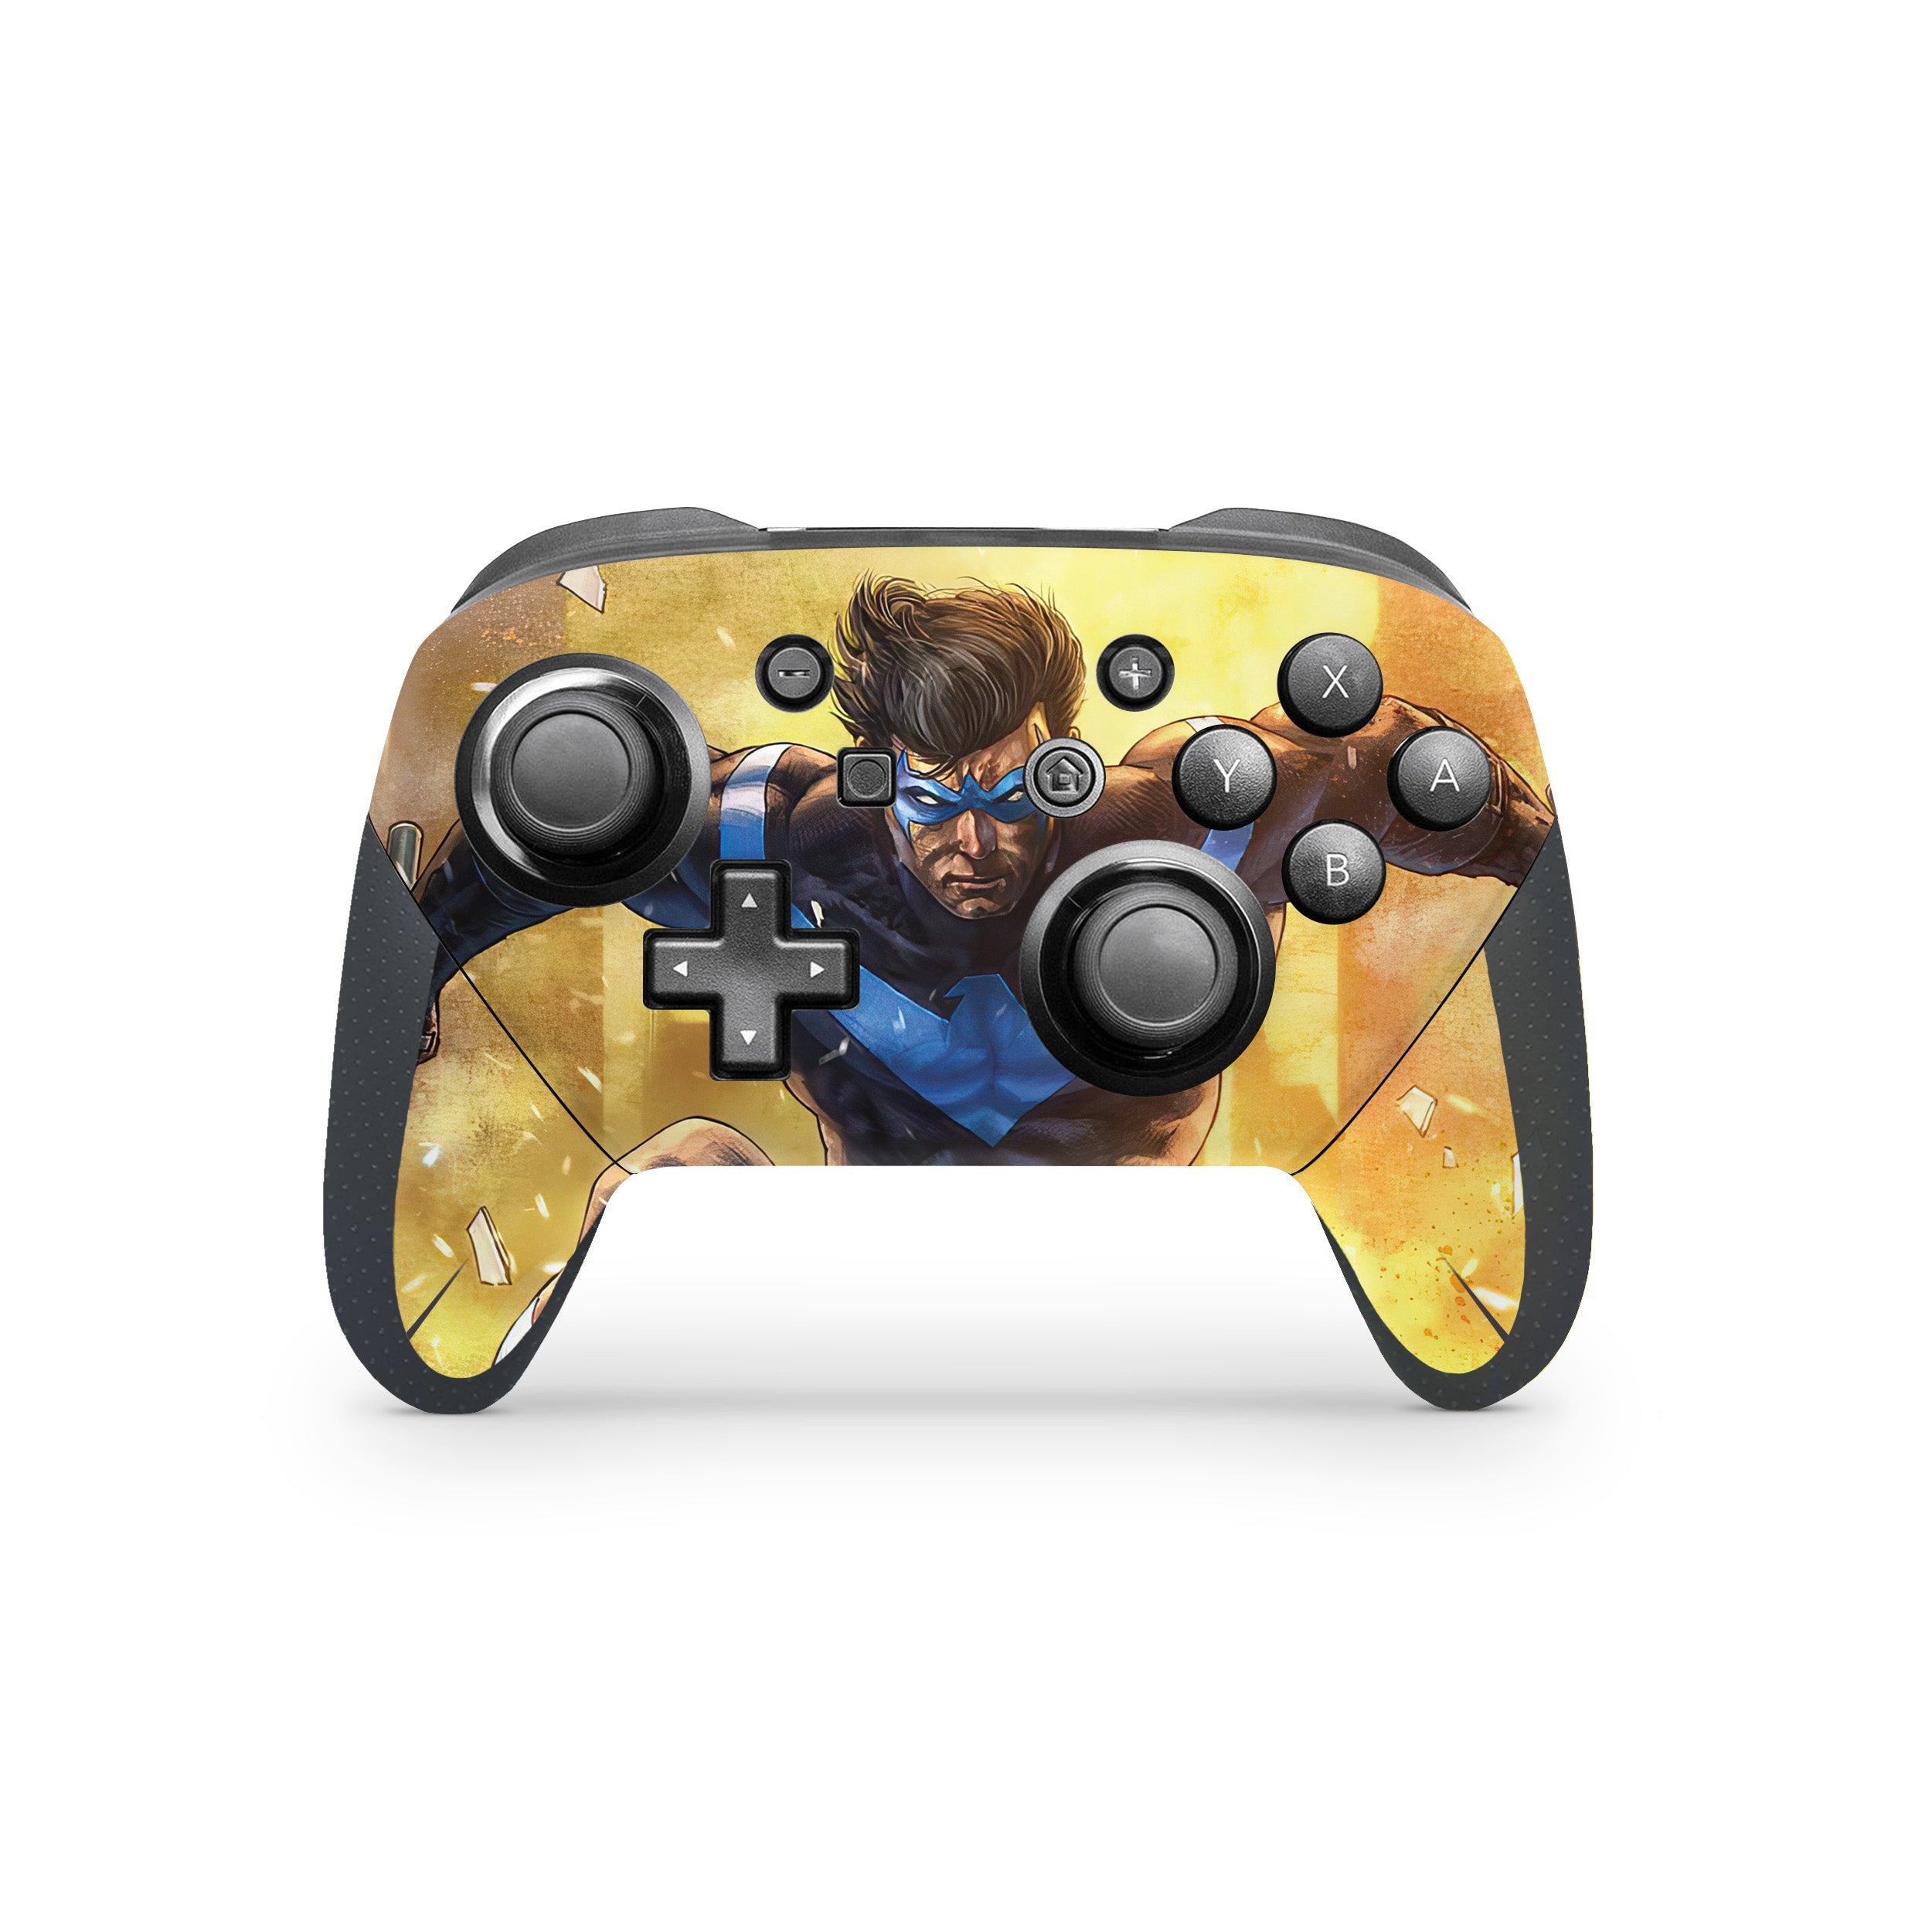 A video game skin featuring a DC Comics Nightwing design for the Switch Pro Controller.